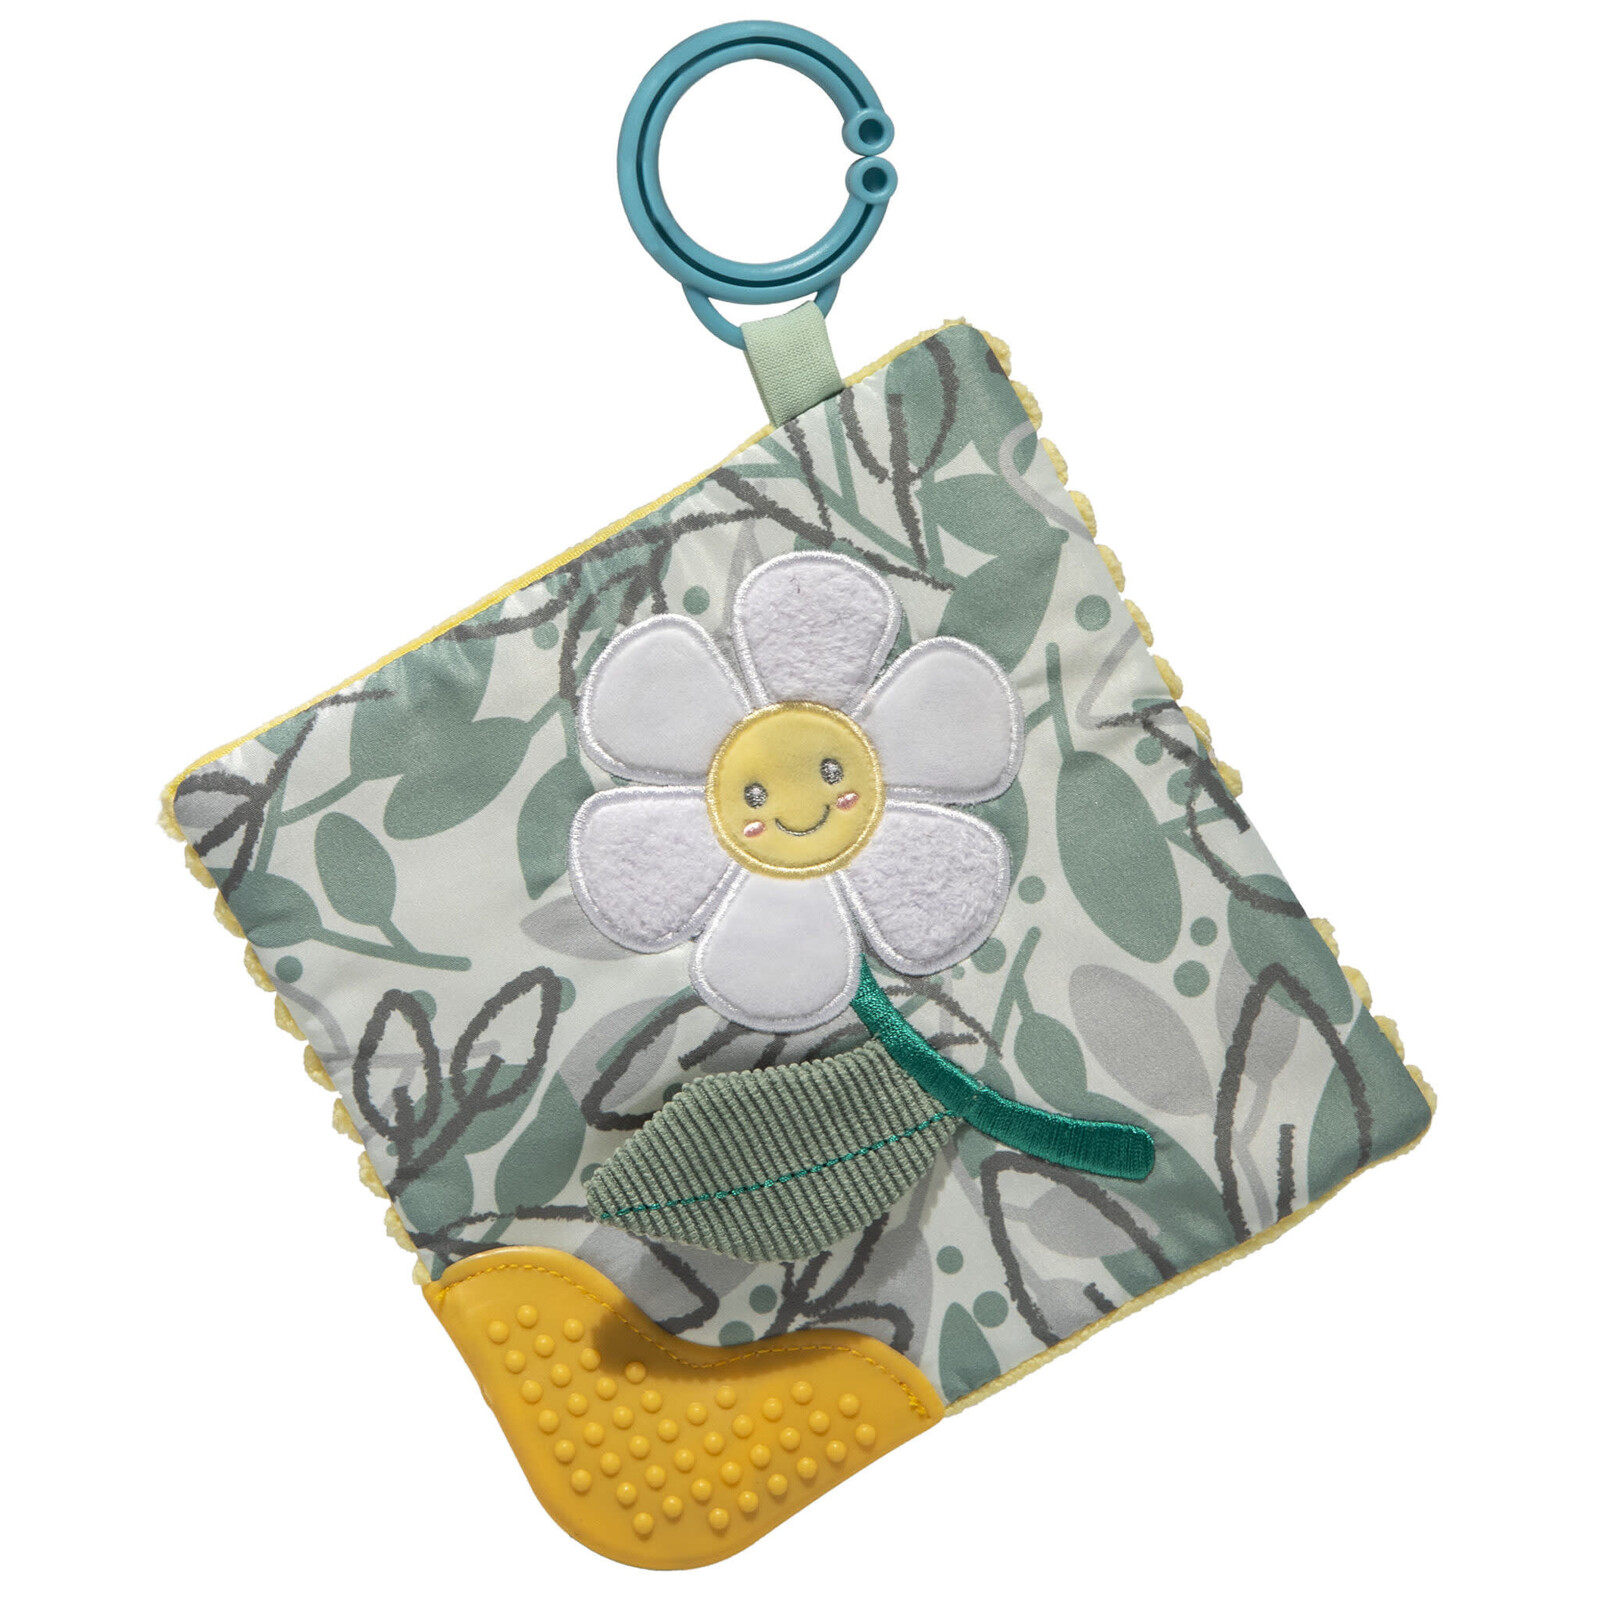 Mary Meyer Sweet Soothie Daisy Crinkle Teether    44235 loading=